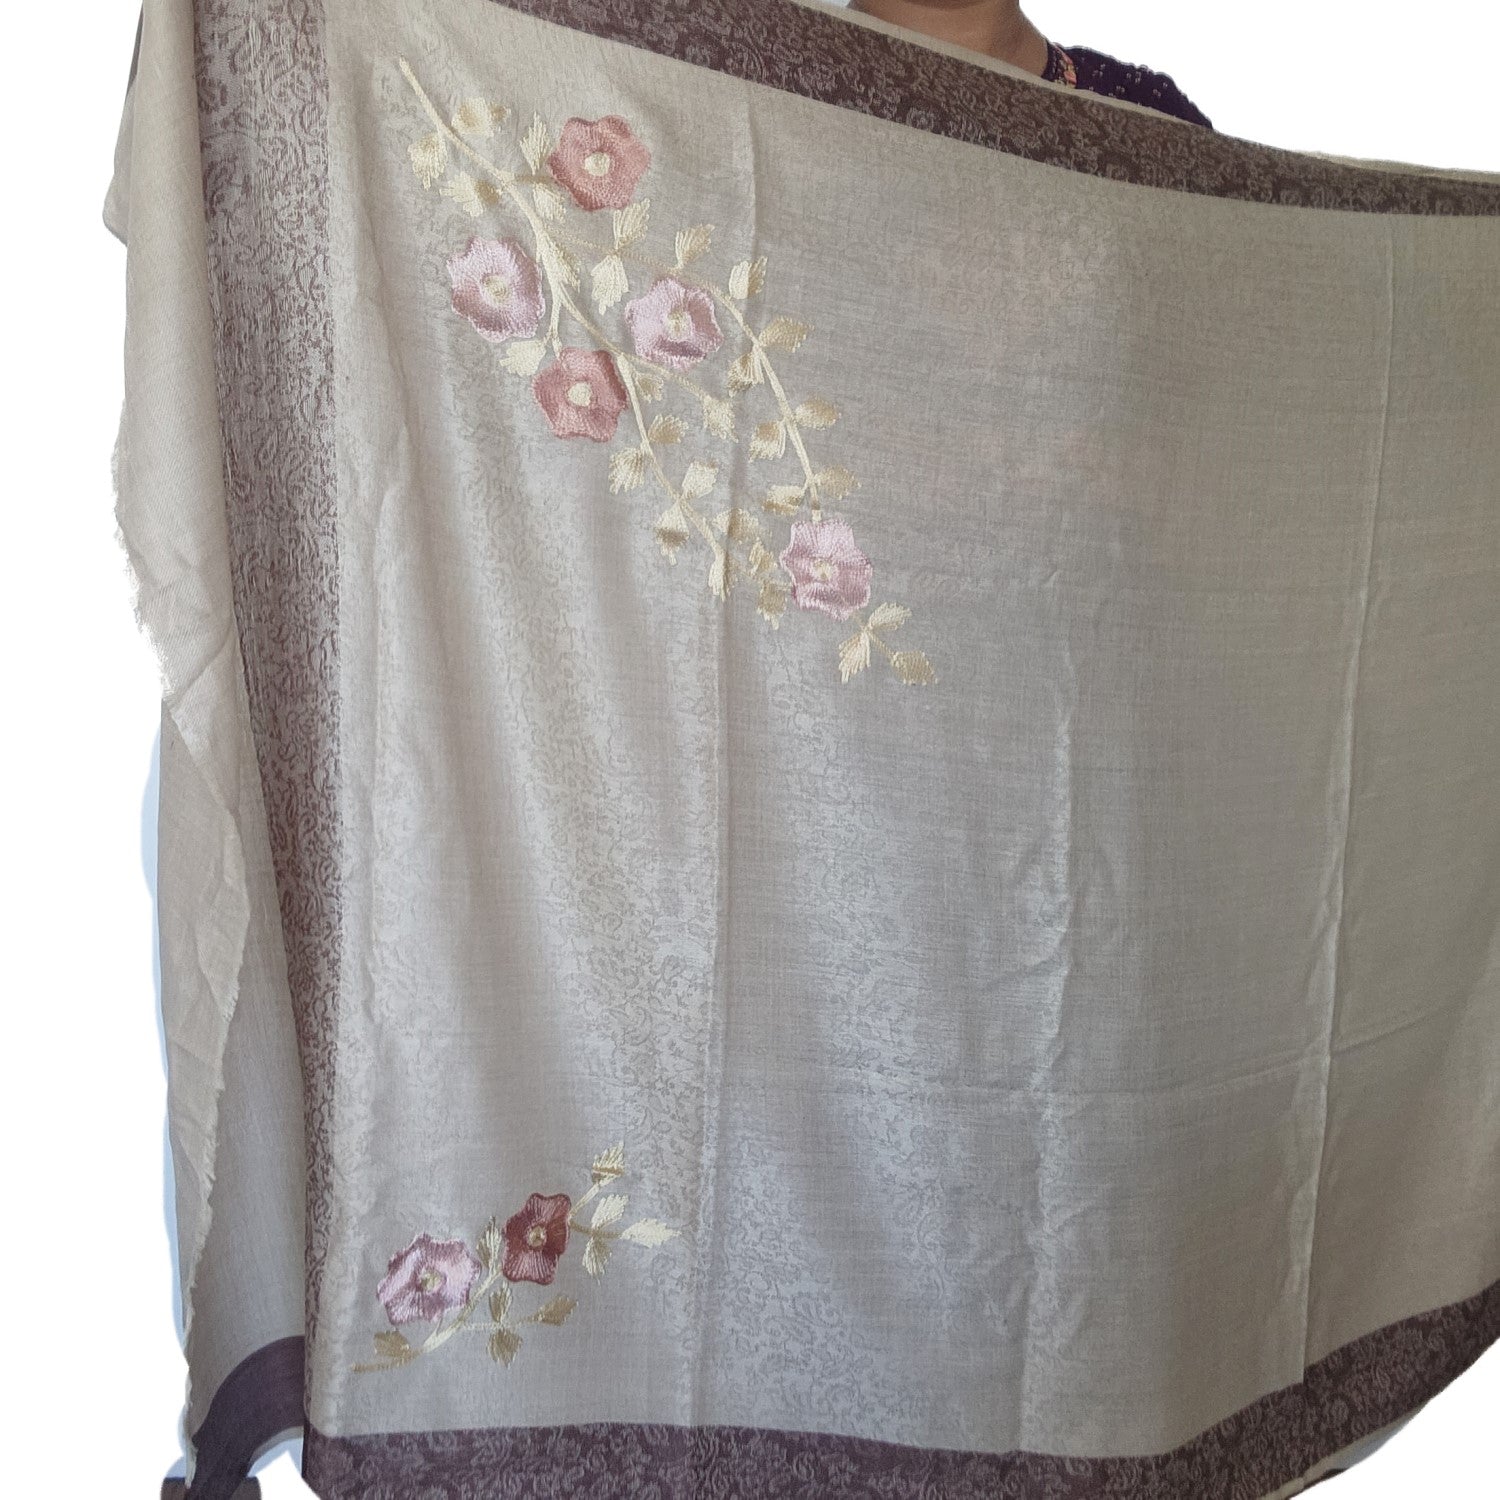 pure-wool-pashmina-shawl-light-brown-with-floral-design-thread-work-with-brown-border